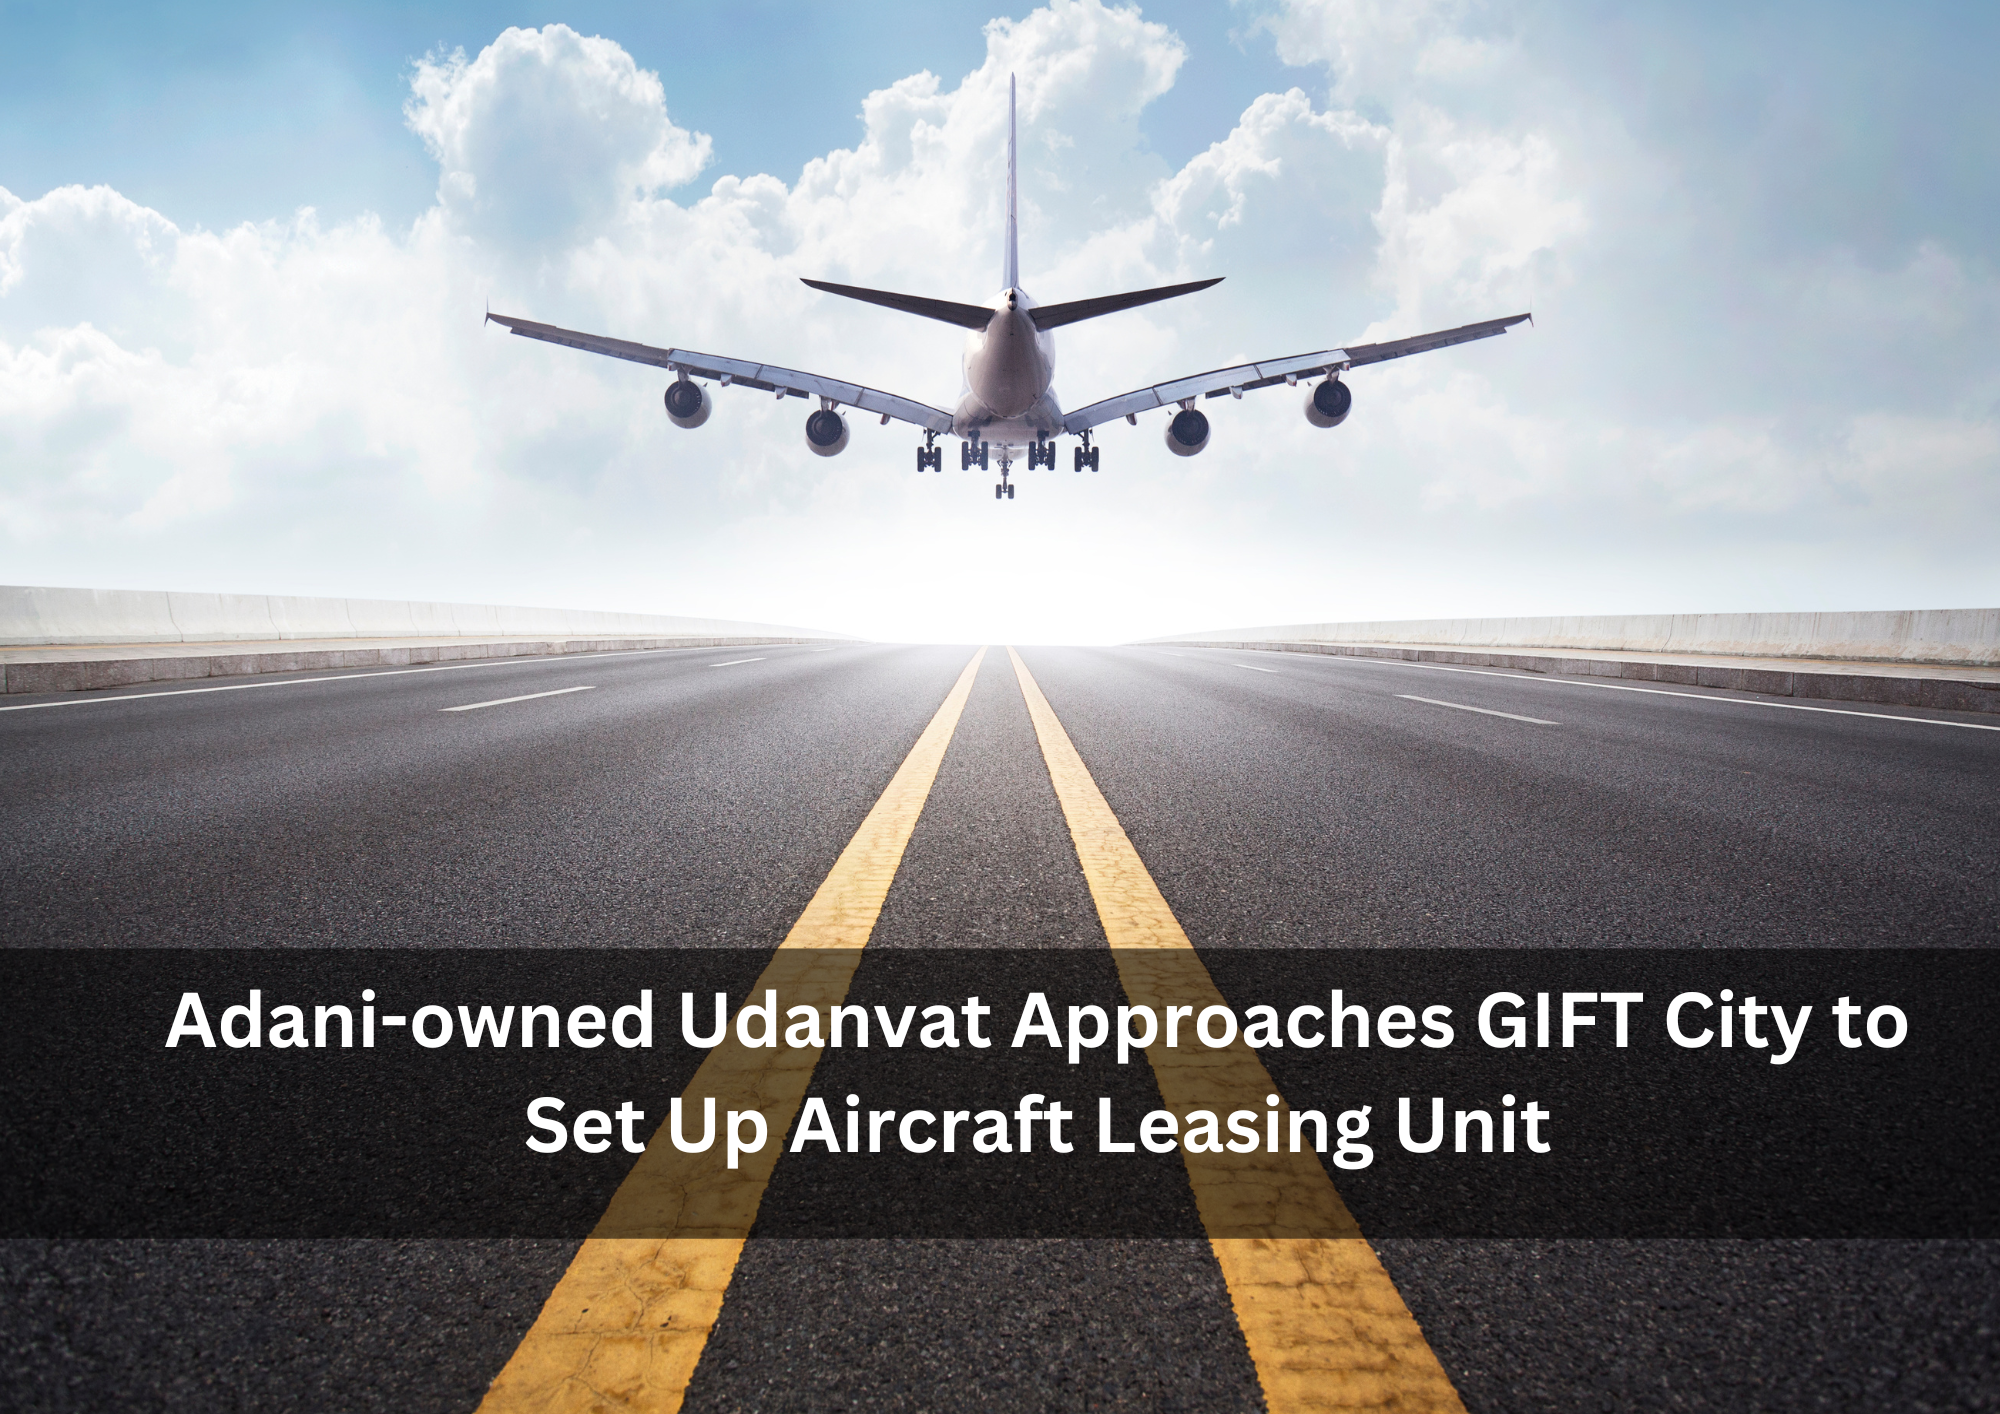 Adani-owned Udanvat Approaches GIFT City to Set Up Aircraft Leasing Unit